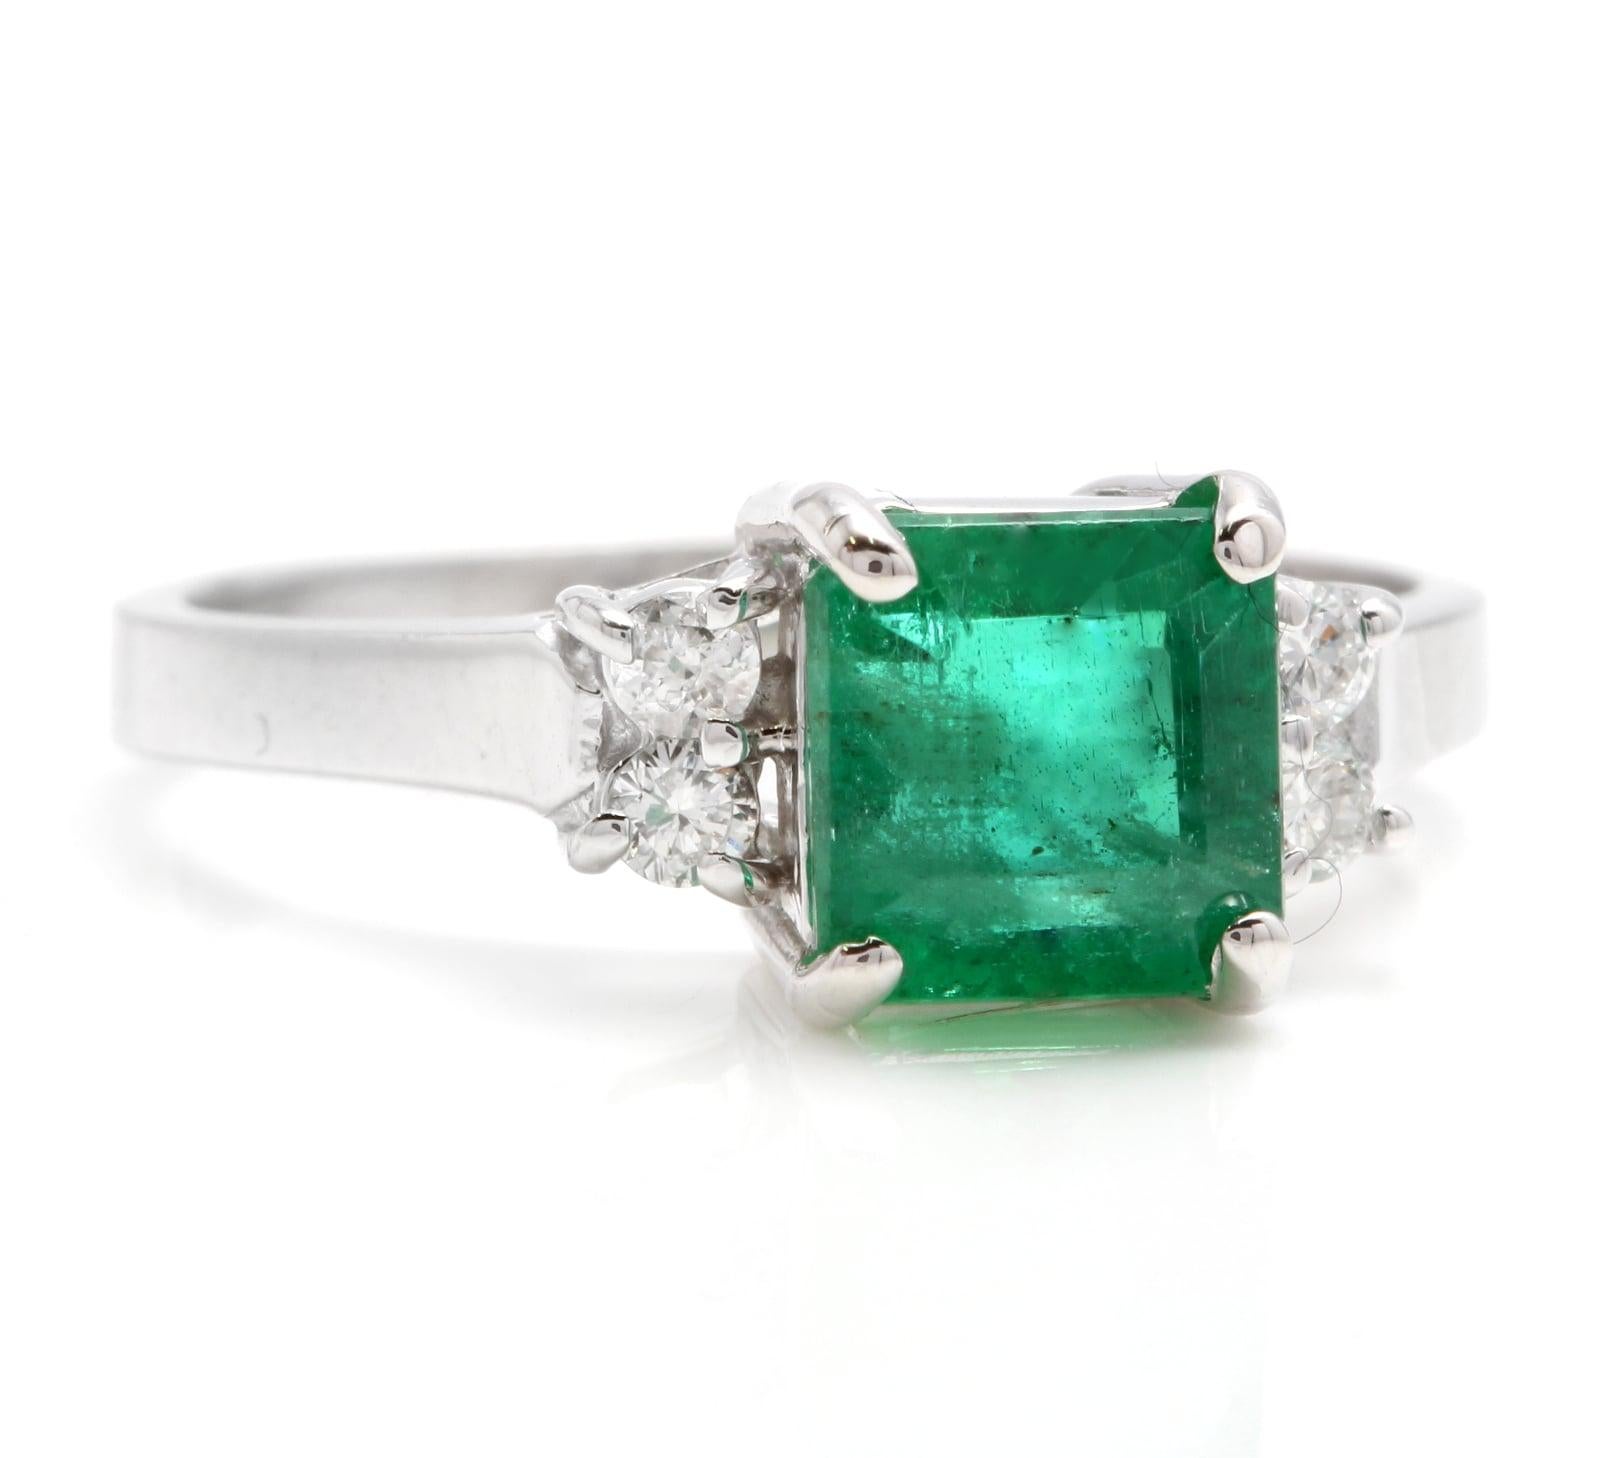 2.25 Carats Natural Emerald and Diamond 14K Solid White Gold Ring

Total Natural Green Emerald Weight is: Approx. 2.10 Carats (transparent)

Emerald Measures: 6.50 x 6.60mm

Natural Round Diamonds Weight: .15 Carats (color G-H / Clarity